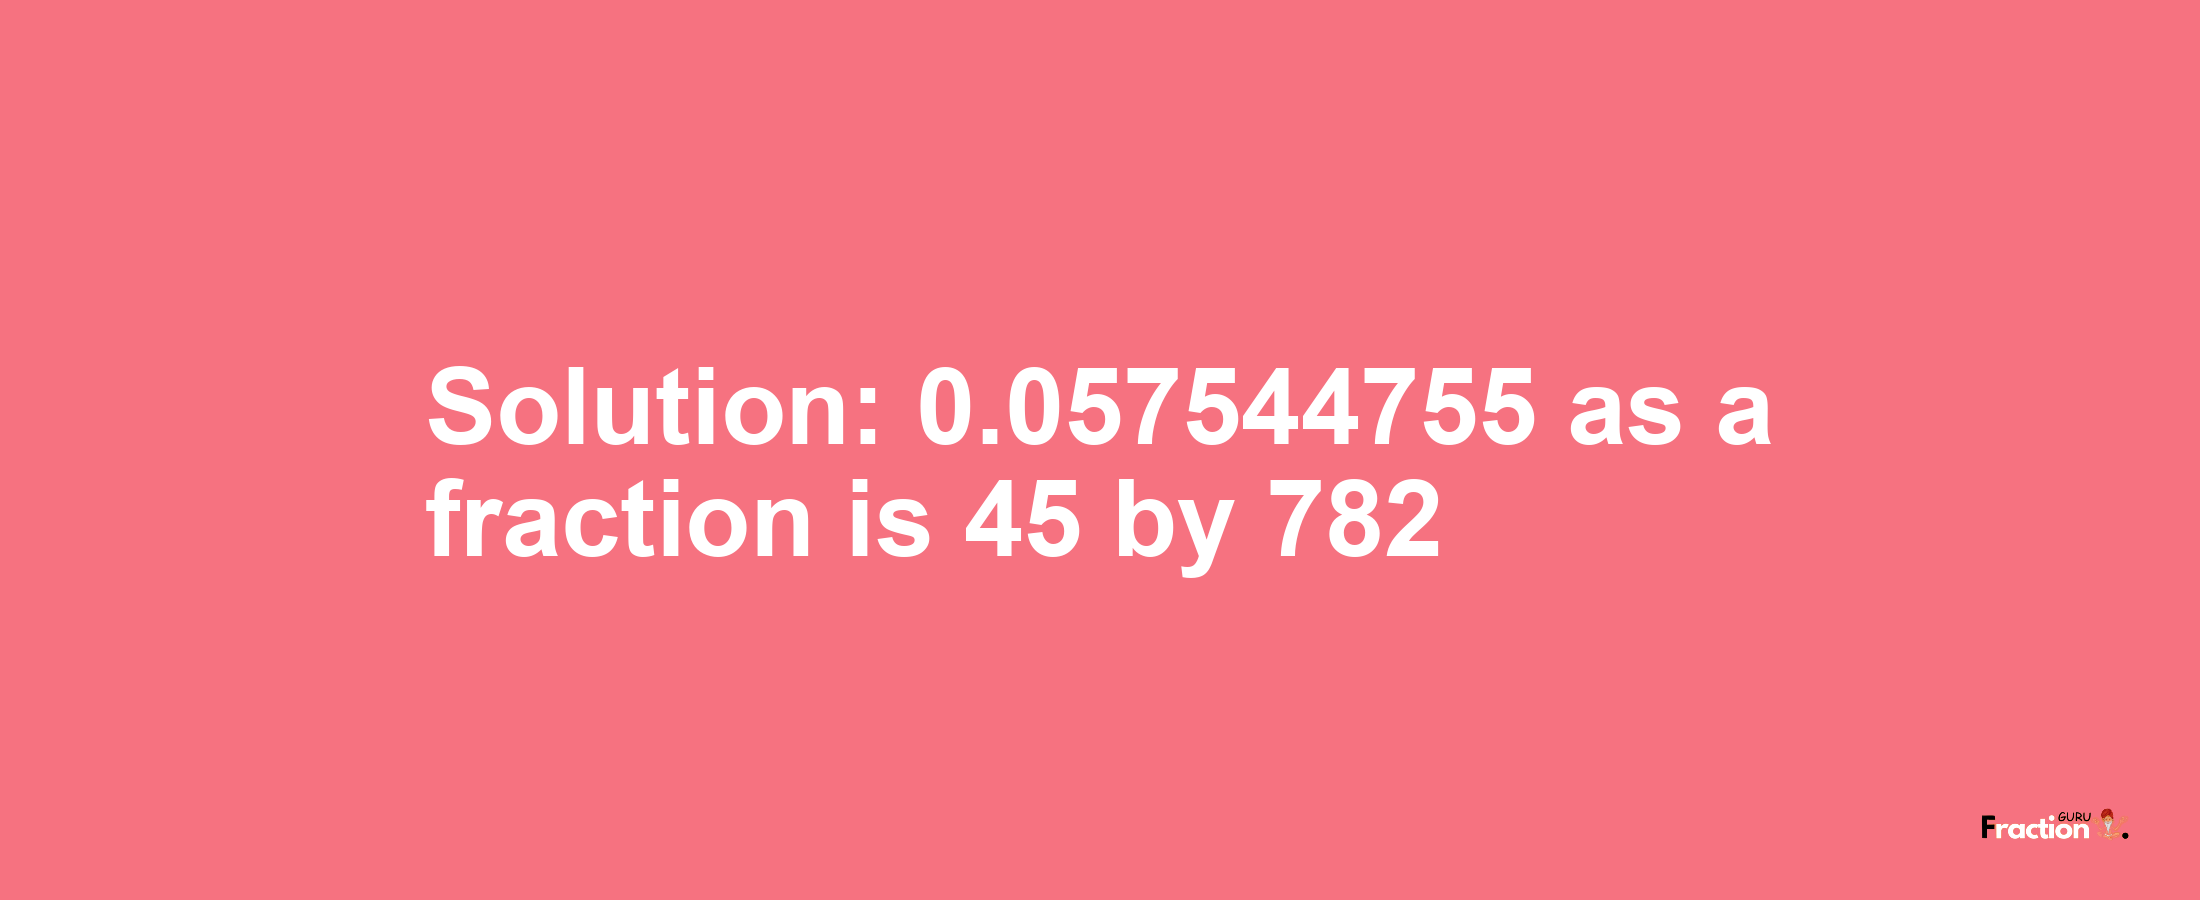 Solution:0.057544755 as a fraction is 45/782